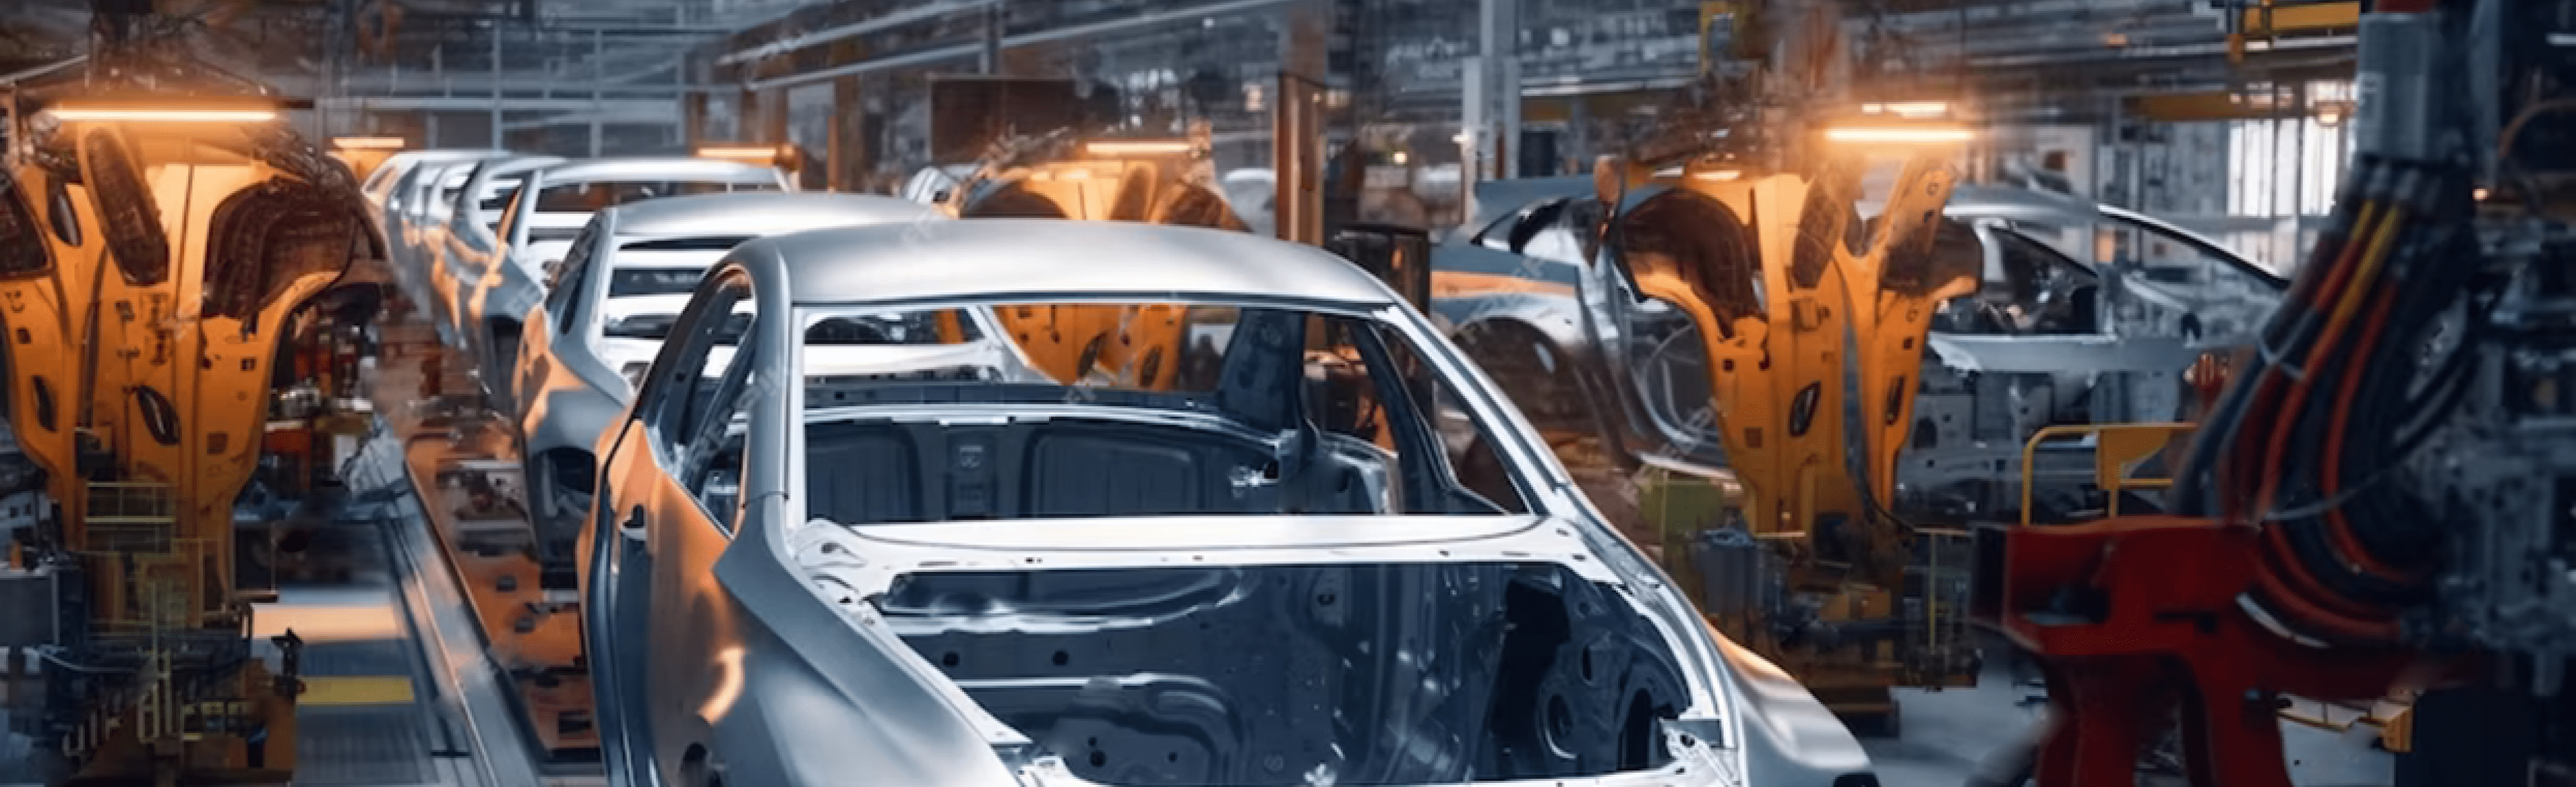 Car on an assembly line undergoing manufacturing